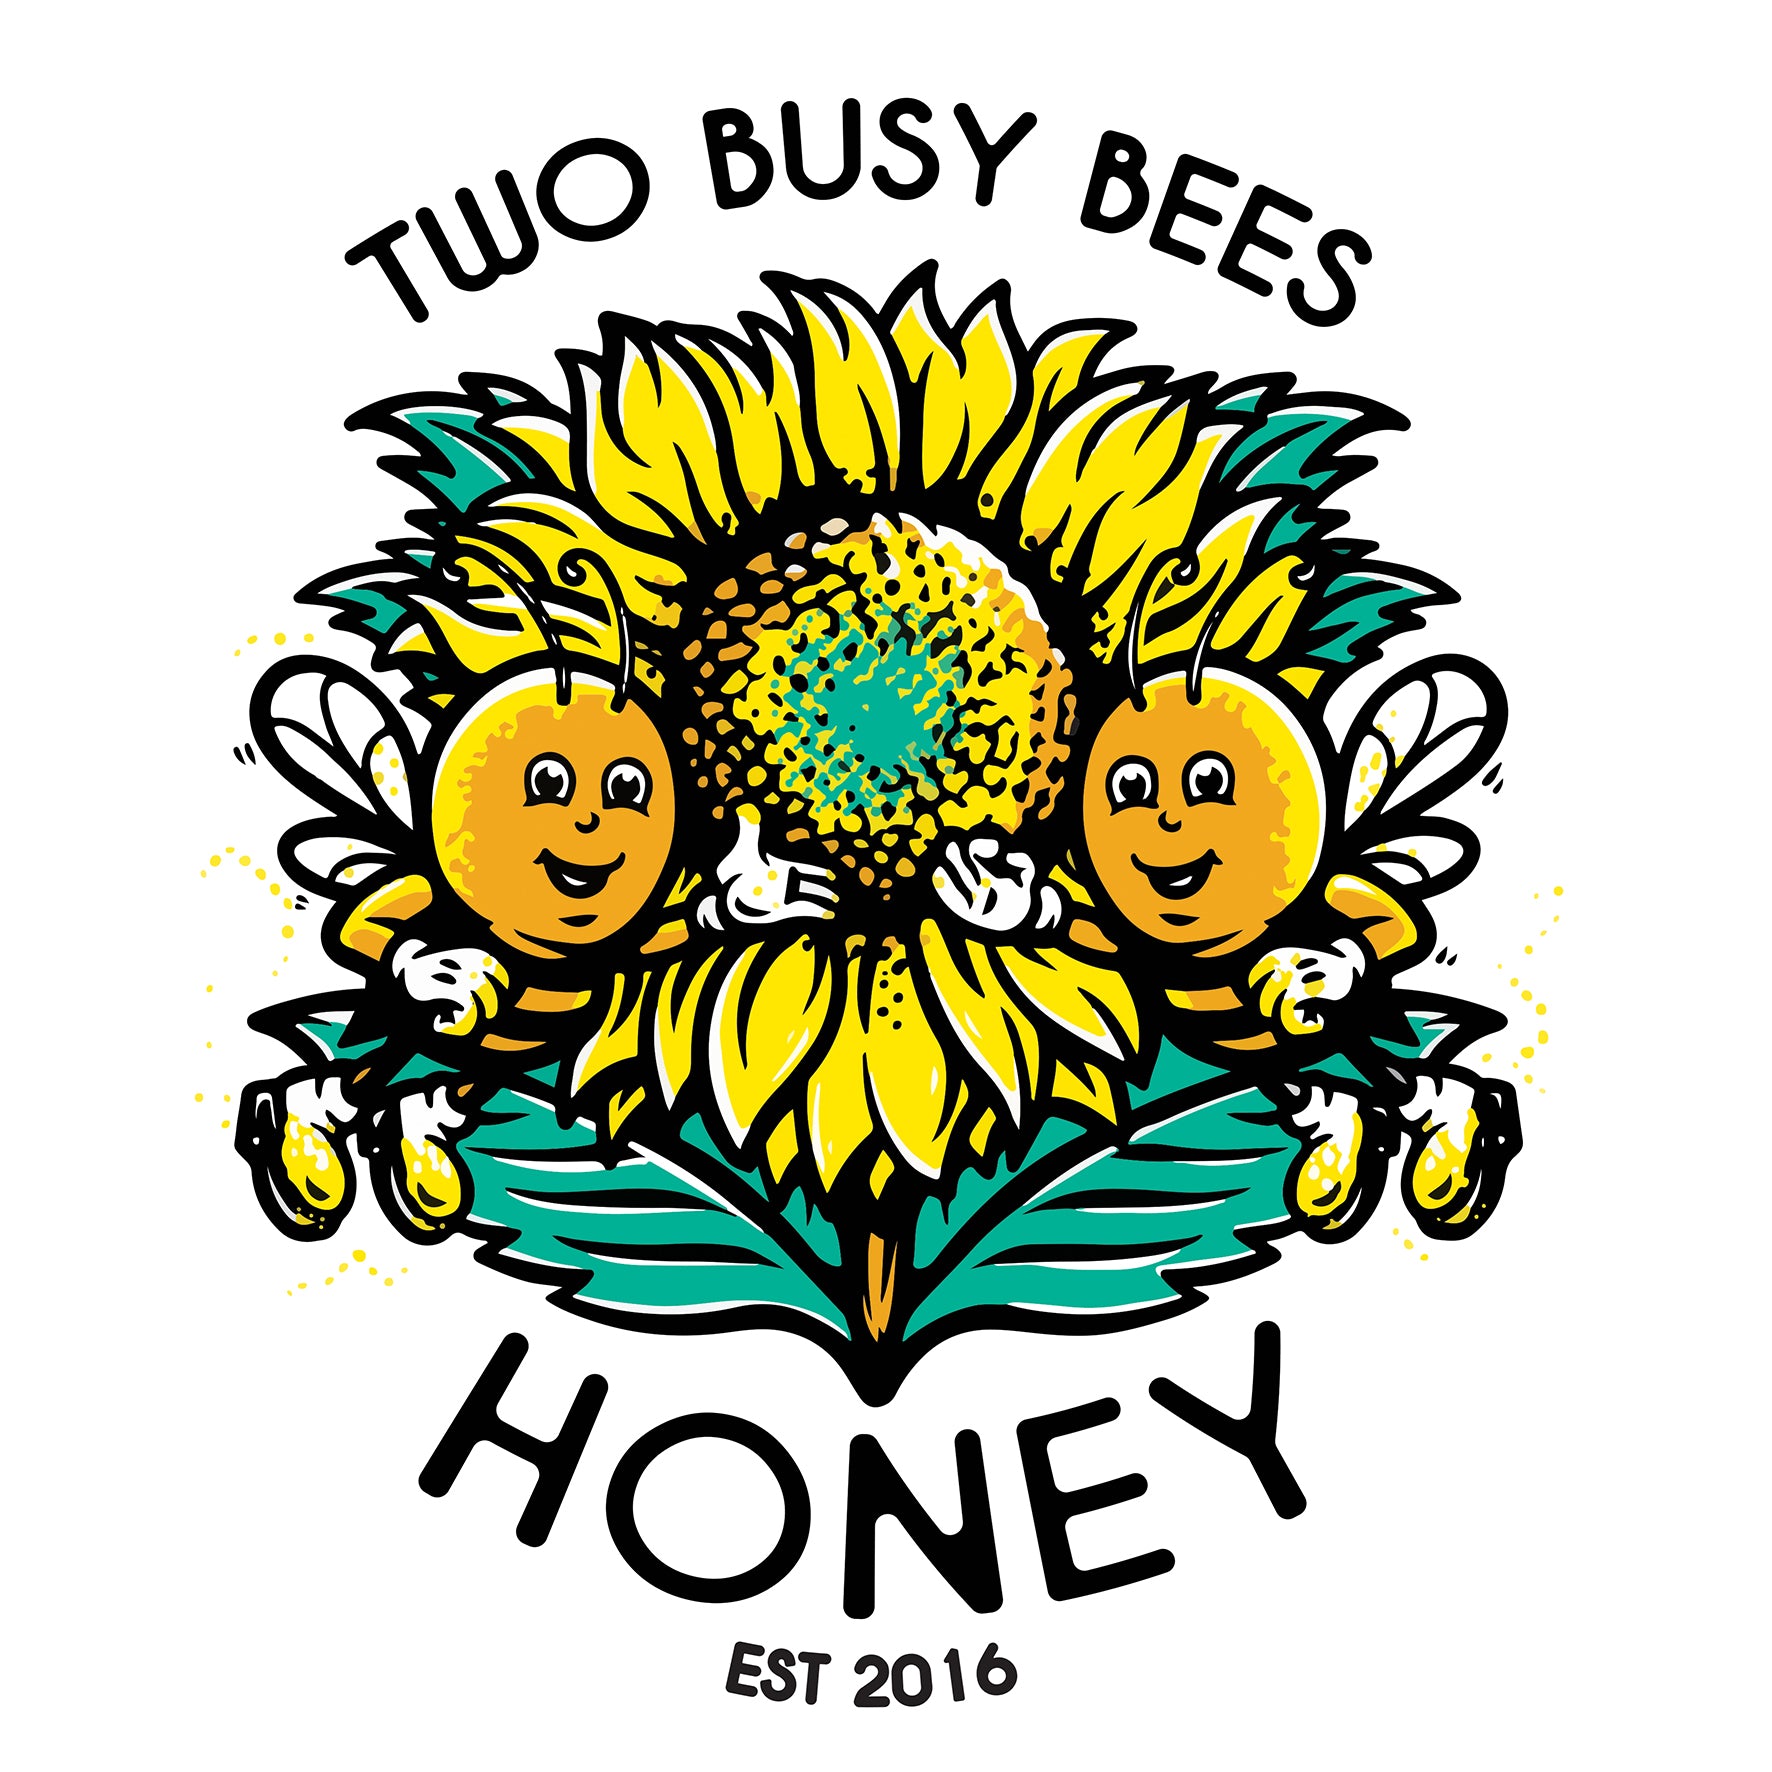 It's our fifth birthday at Two Busy Bees Honey! Let's celebrate!